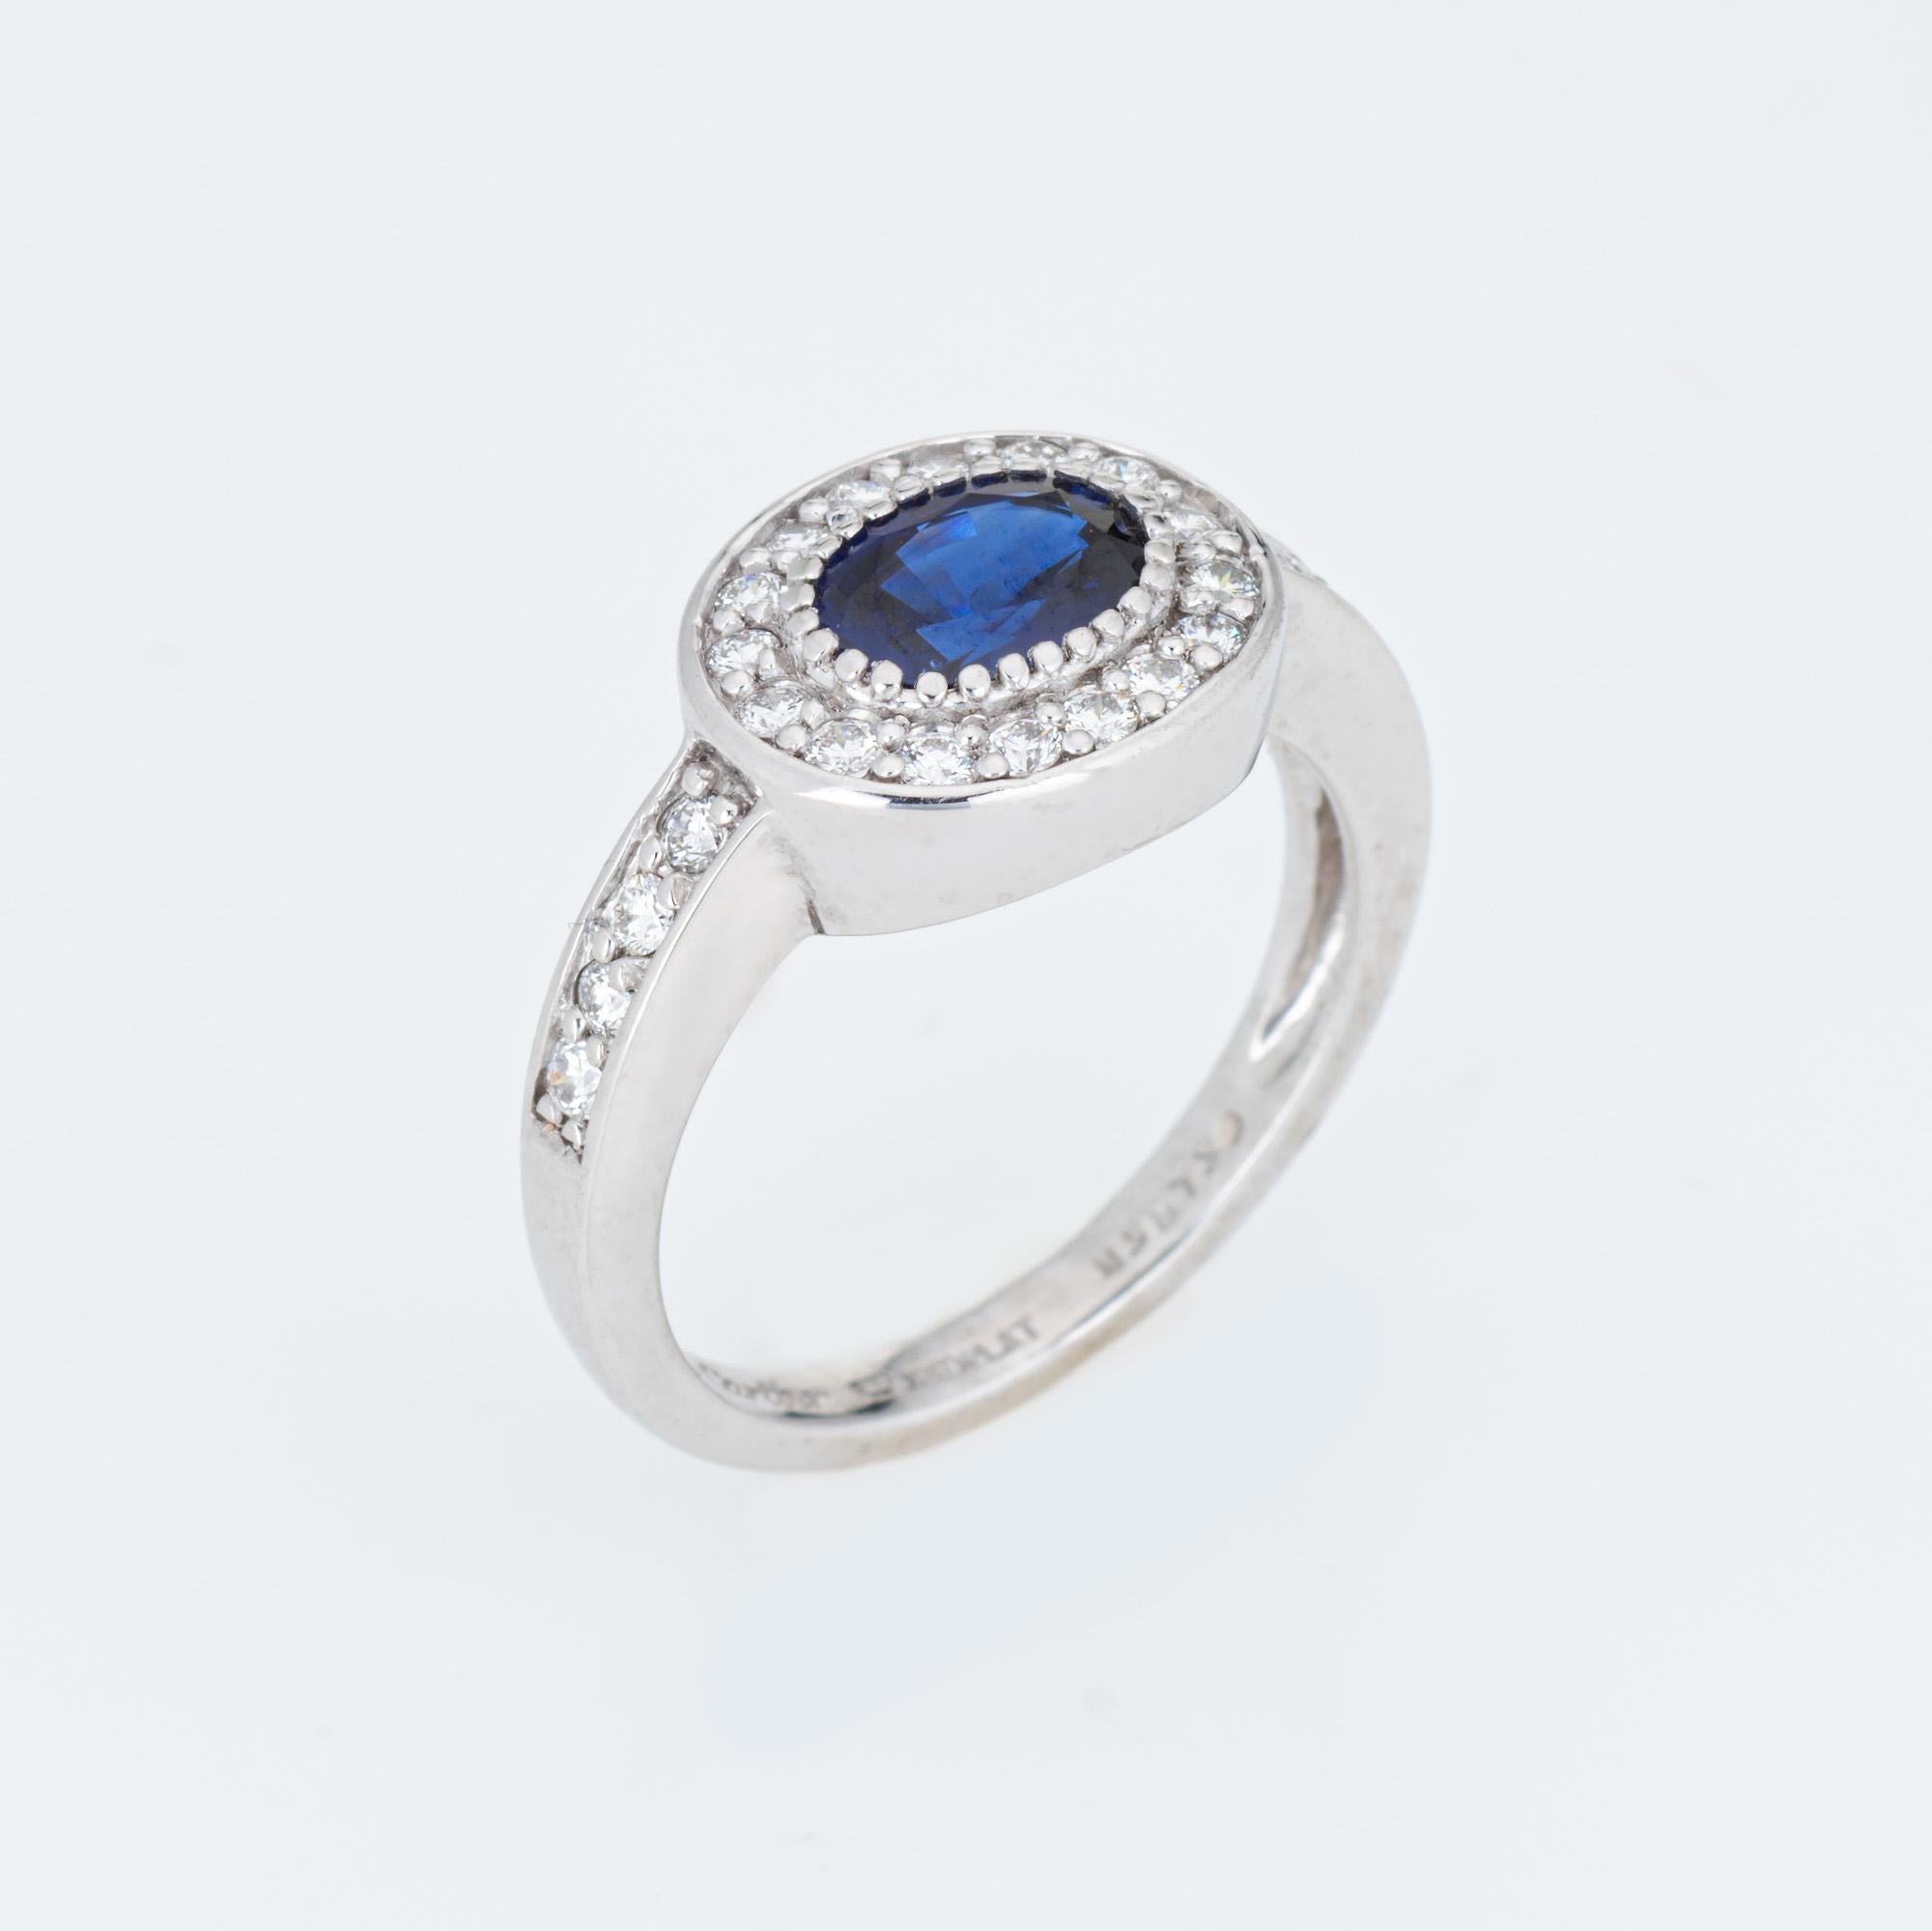 Pre-owned Cartier blue sapphire & diamond ring crafted in 900 platinum.  

Oval faceted blue sapphire measures 6mm x 4mm, accented with 24 estimated 0.01 carat diamonds. The total diamond weight is estimated at 0.24 carats (estimated at F-G color